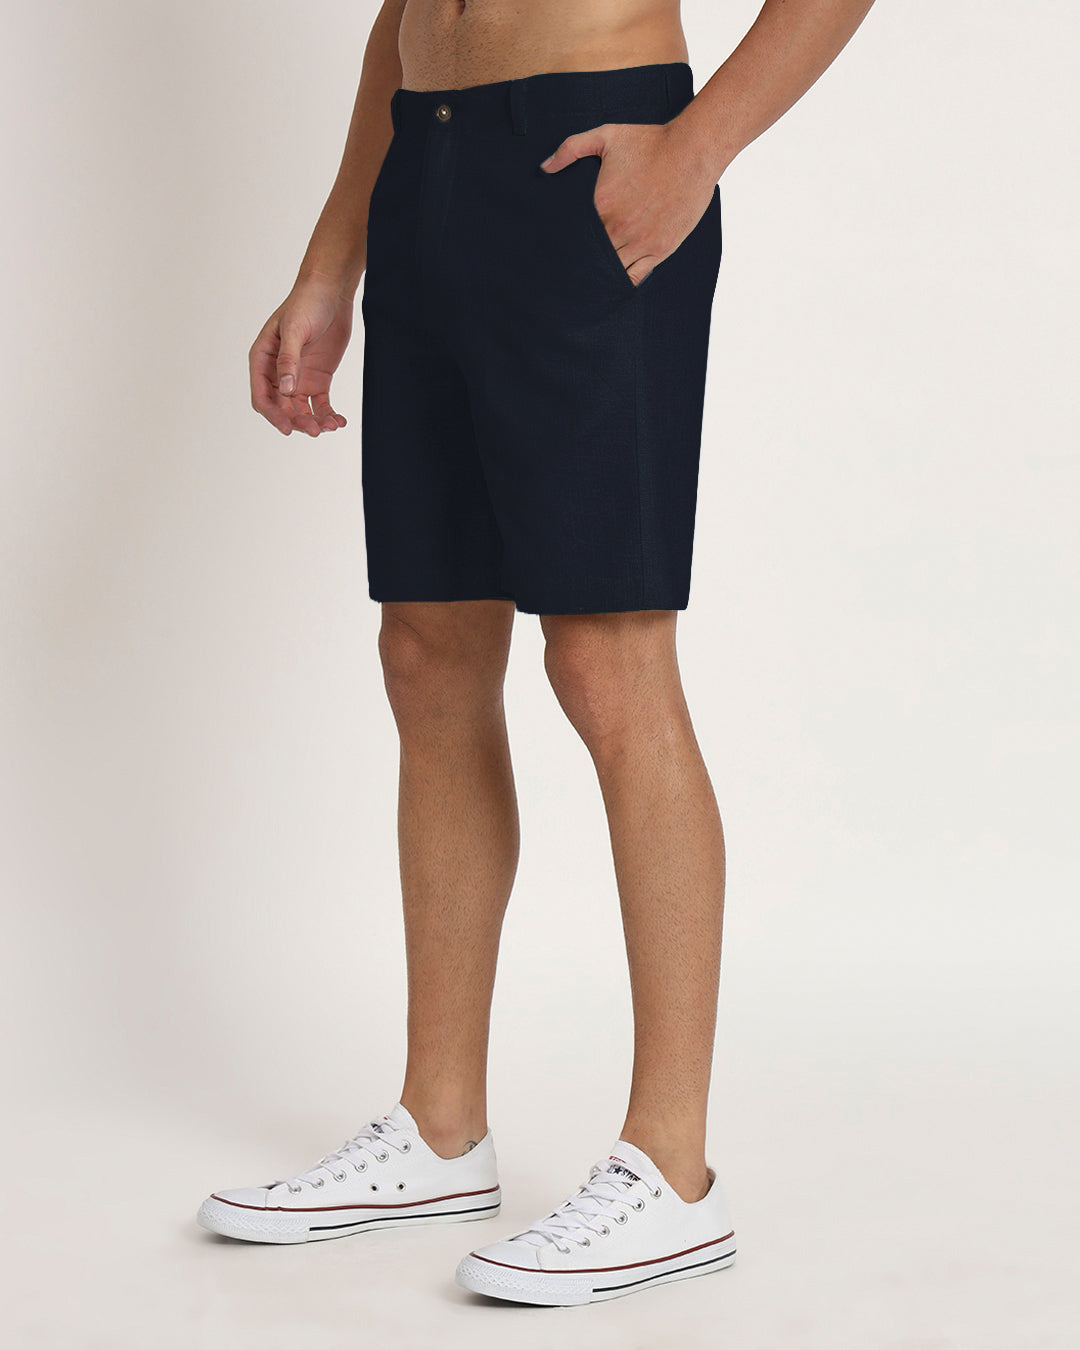 Combo : Ready For Anything Midnight Blue & Beige Men's Shorts